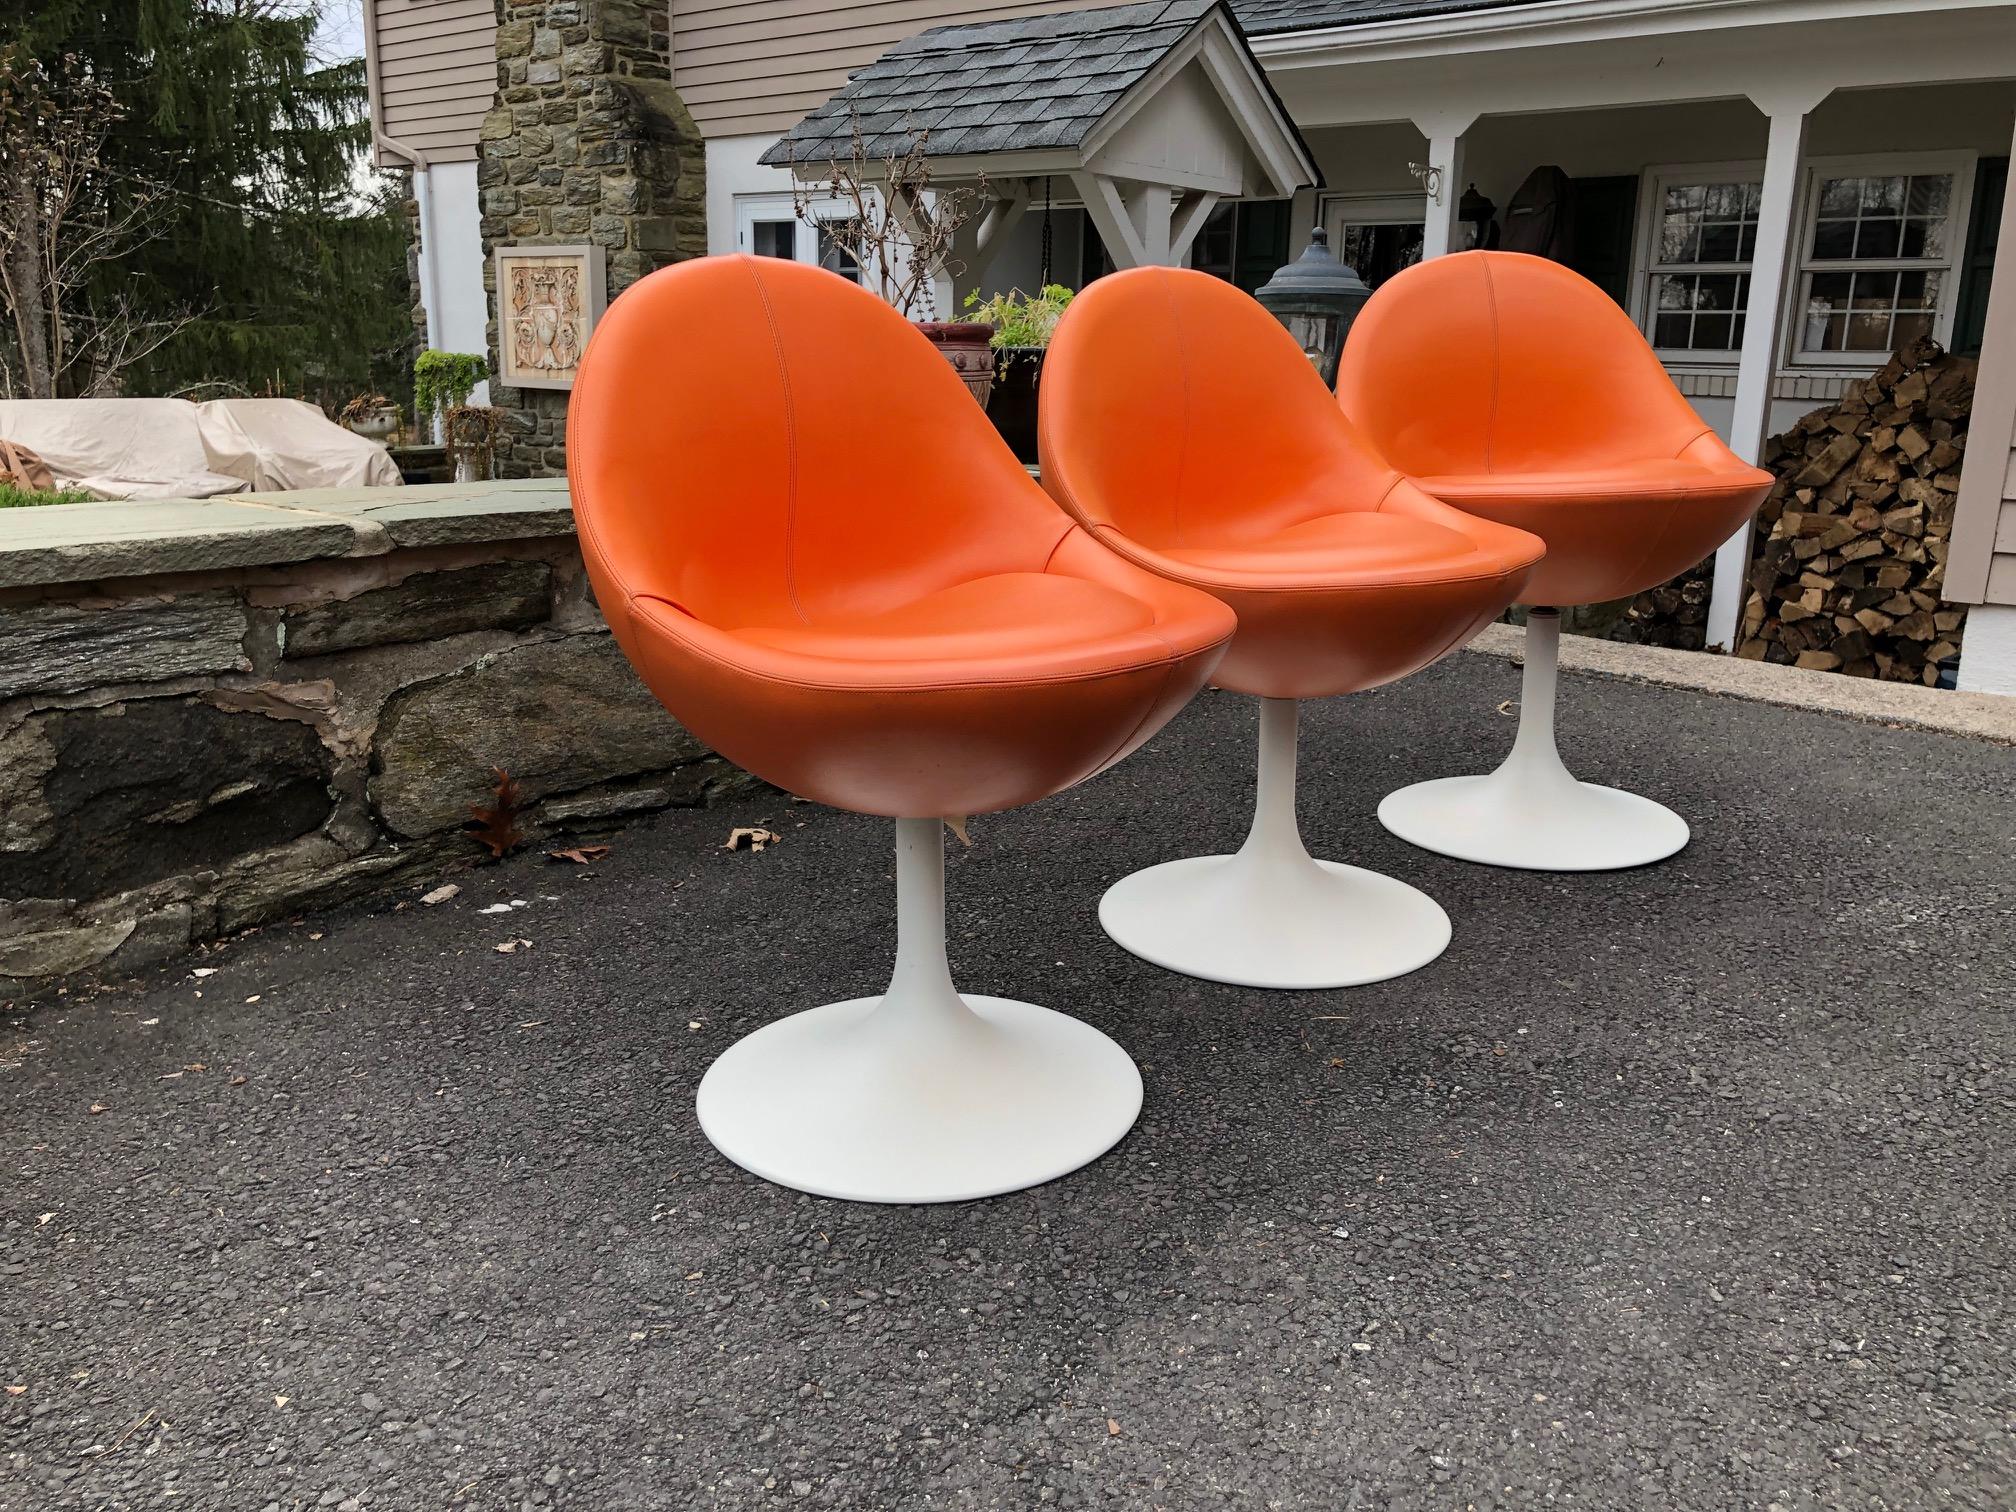 Three Mid-Century Modern Tulip Chairs In Excellent Condition For Sale In Washington Crossing, PA